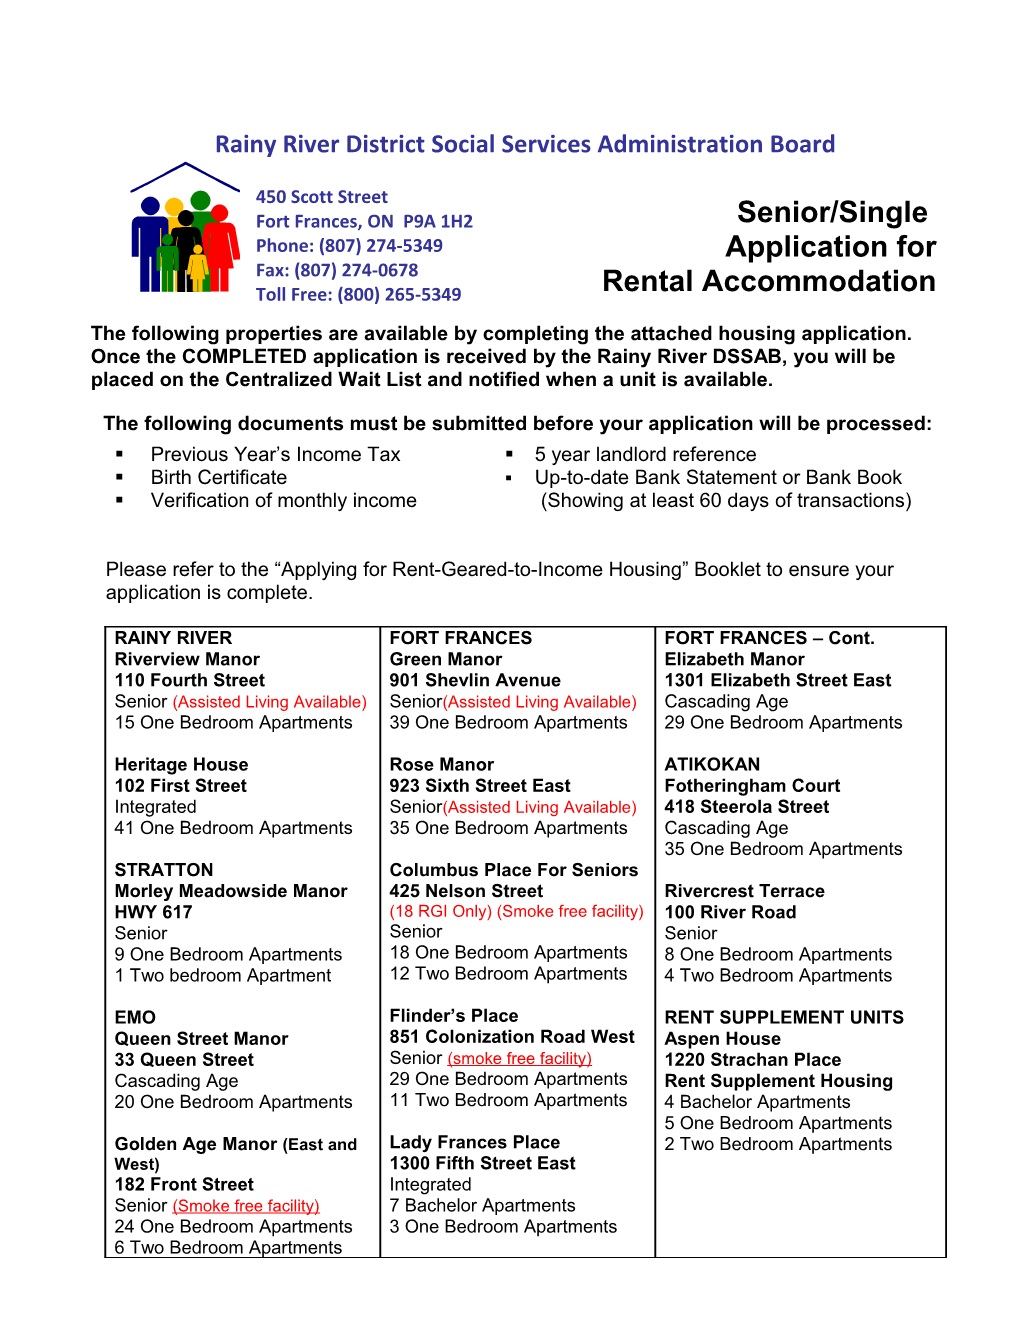 Senior/Single Application for Rental Accommodation Page 2